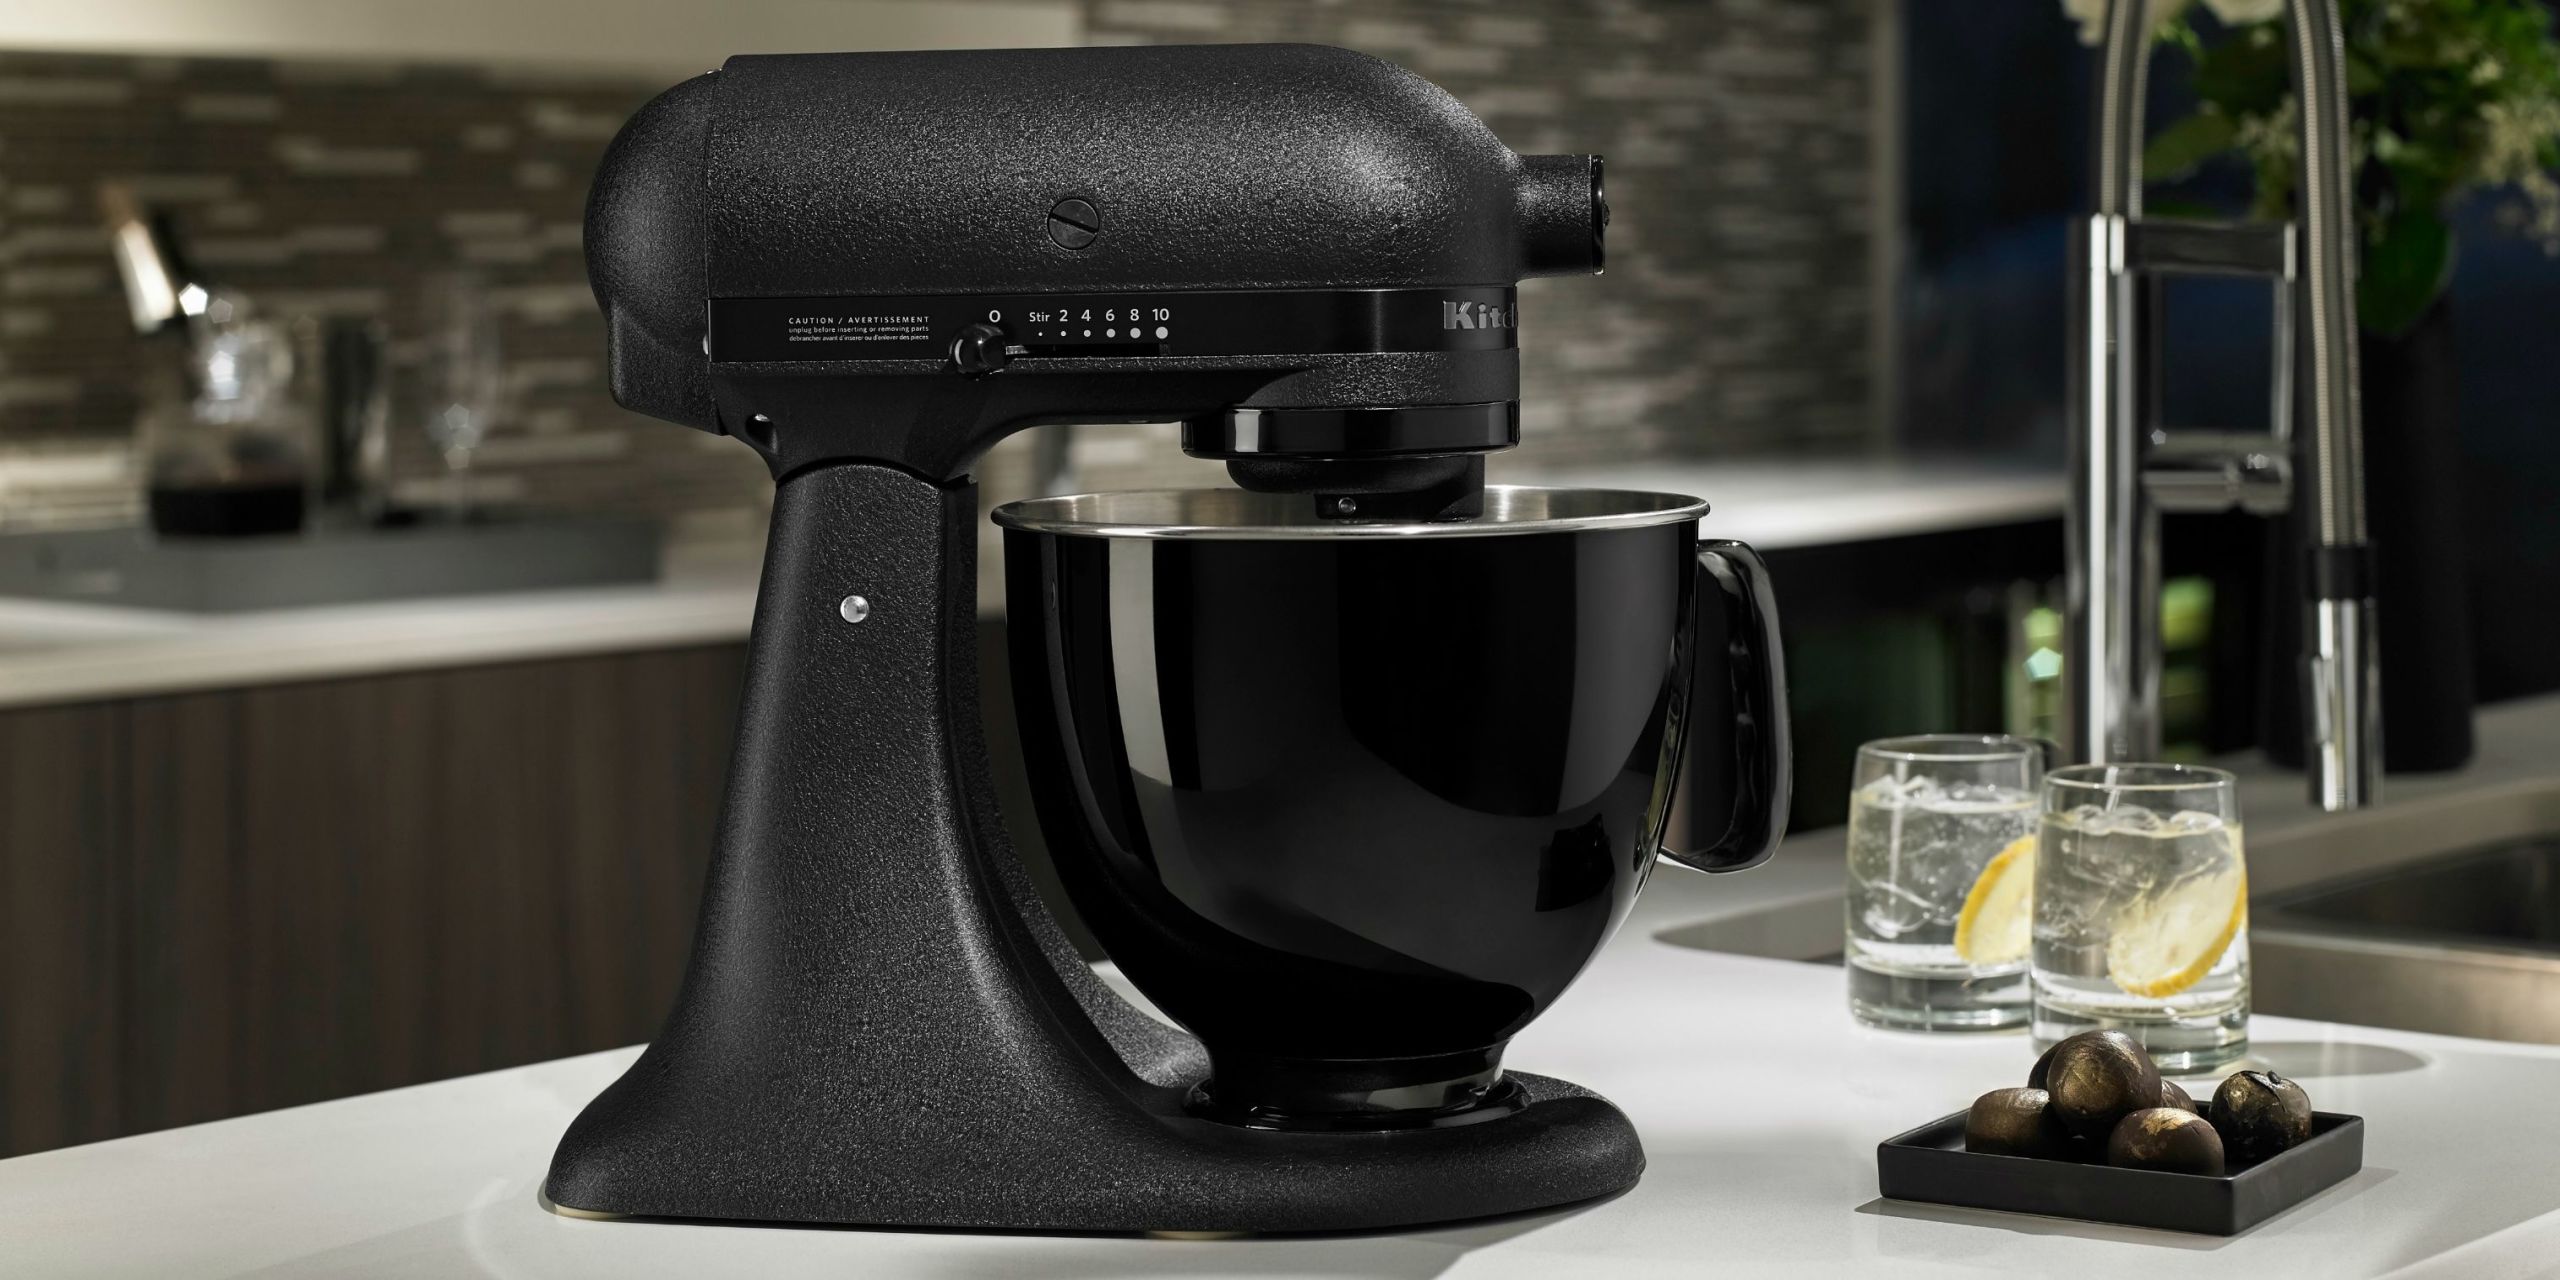 Where To Buy A Kitchen Aid Mixer